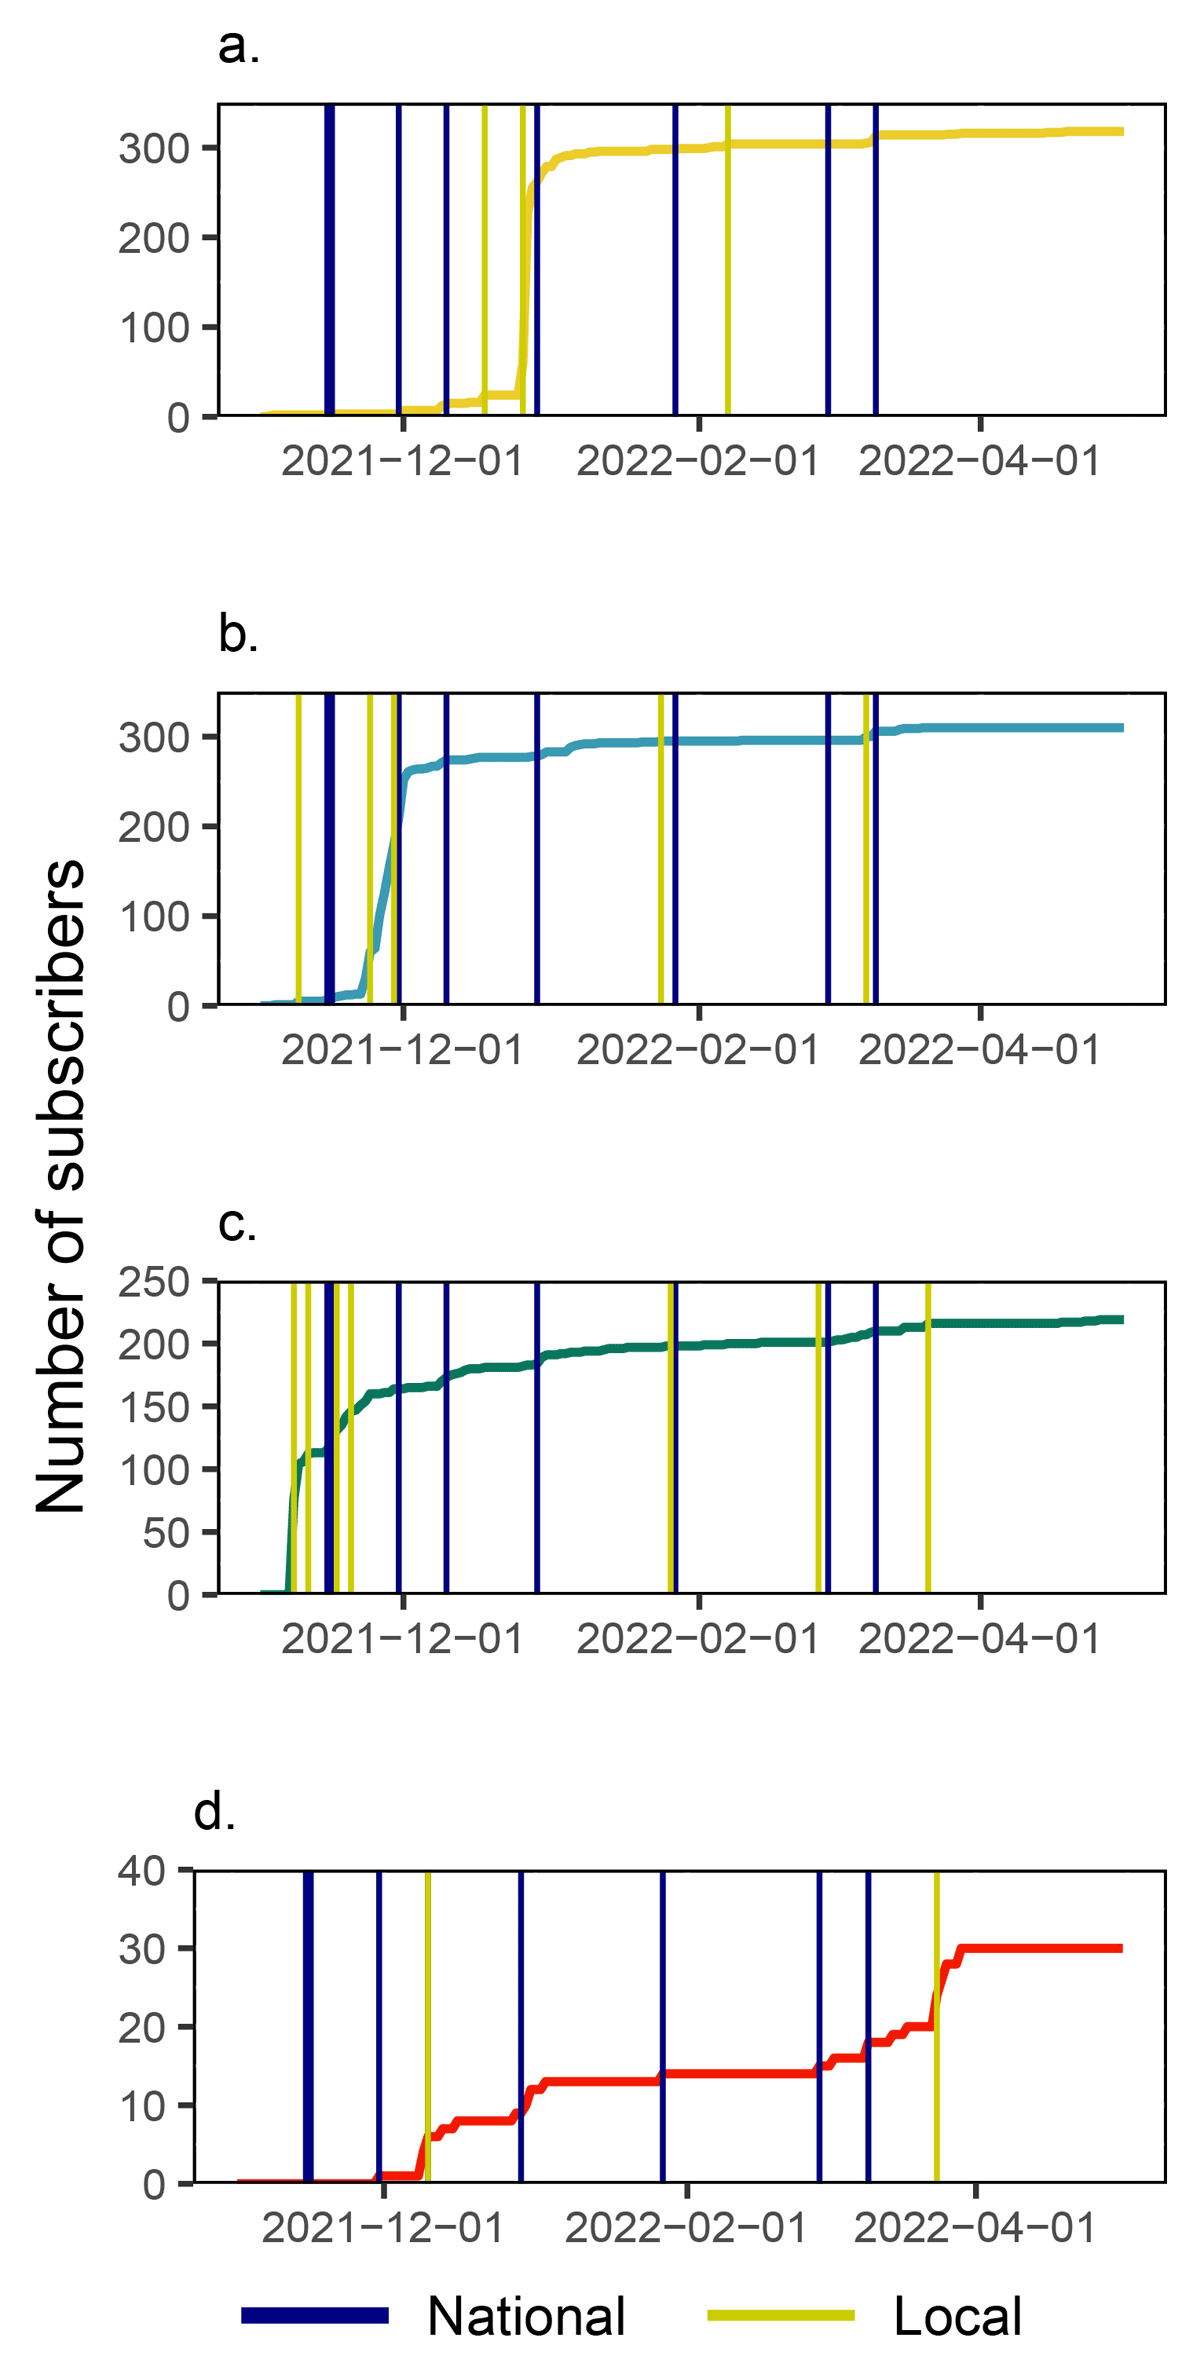 Four time series graphs displaying sign-ups by project region